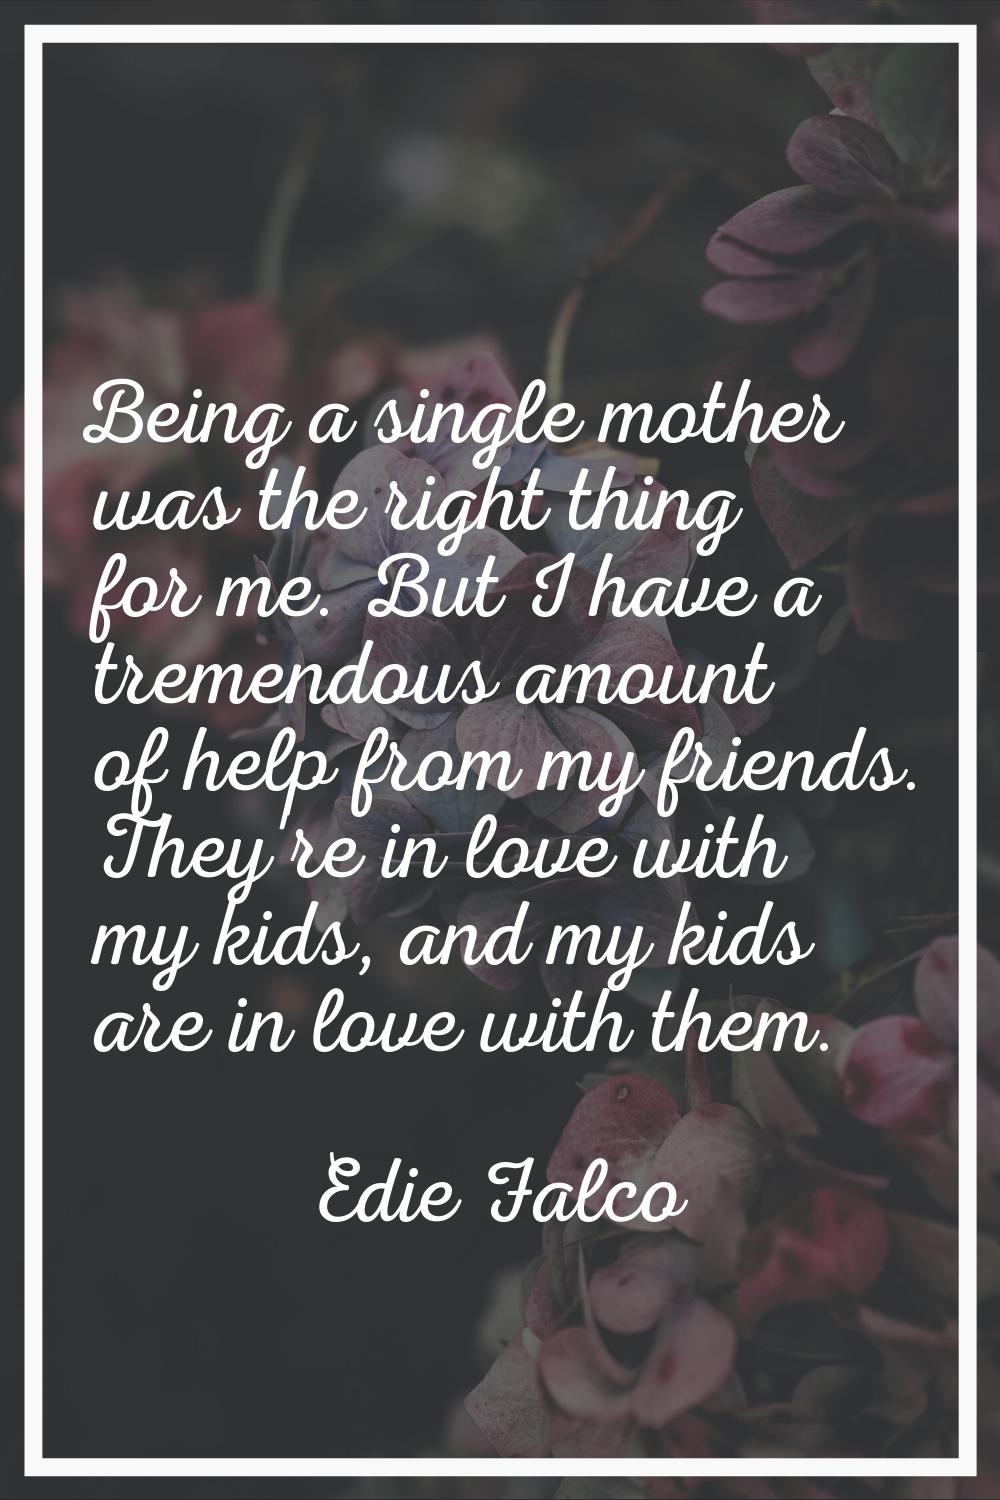 Being a single mother was the right thing for me. But I have a tremendous amount of help from my fr